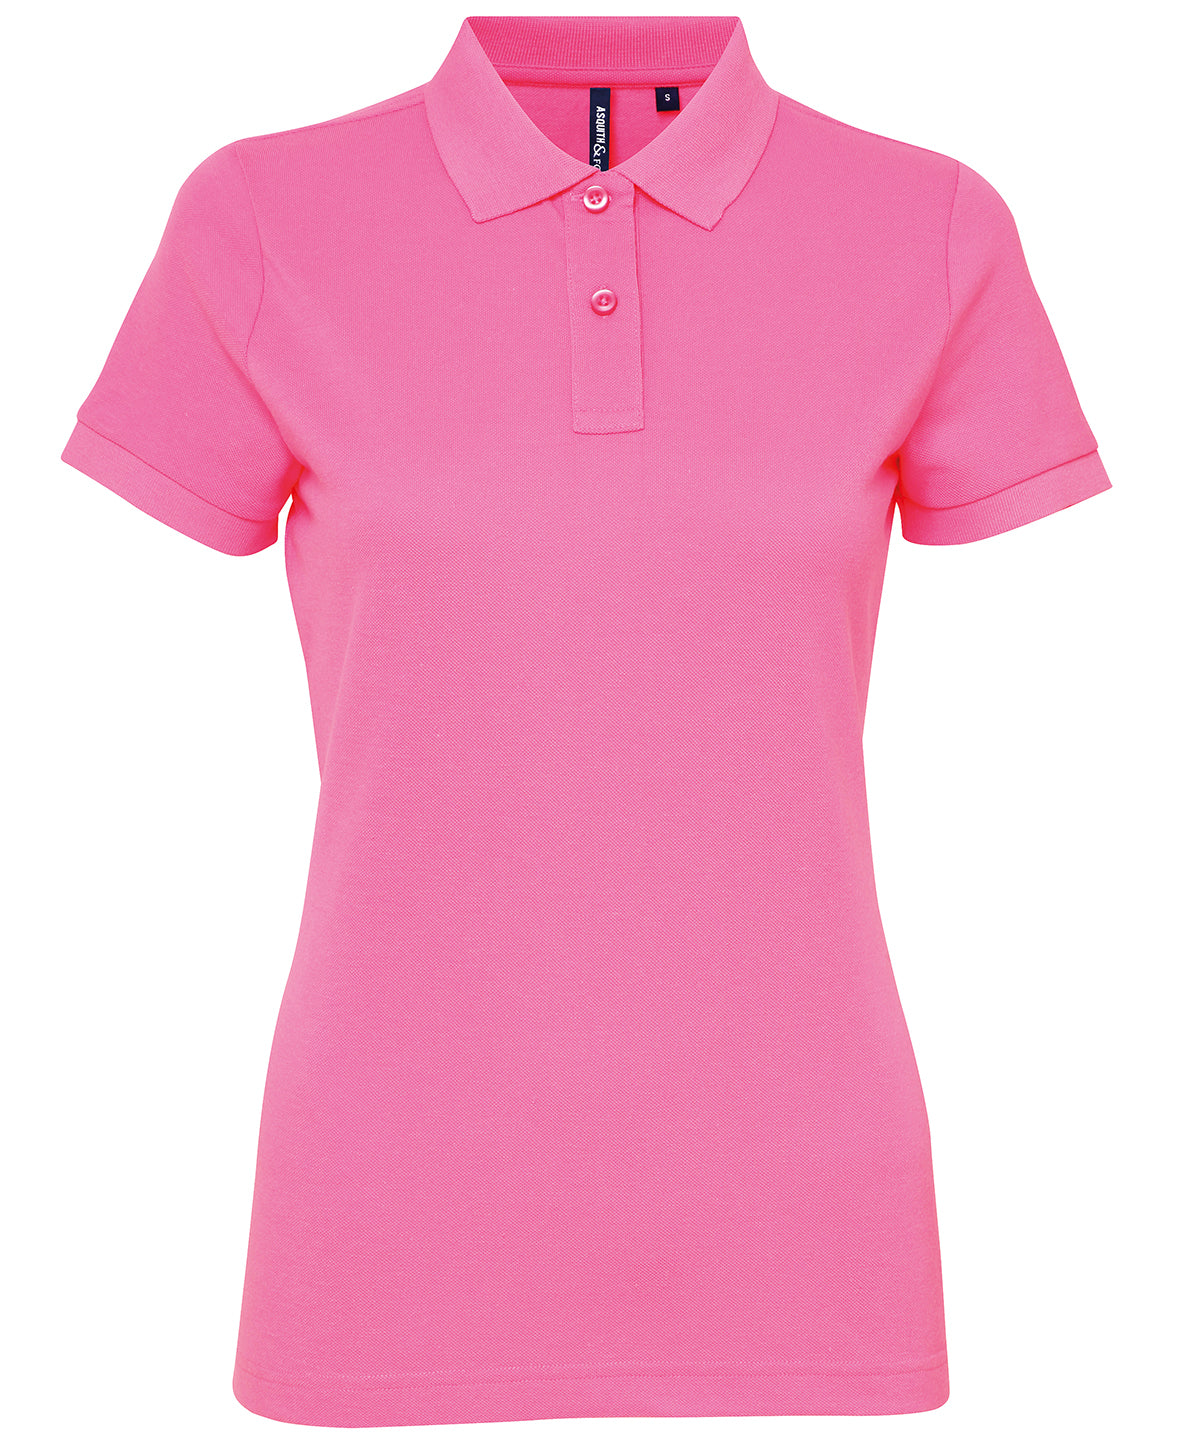 Personalised Polo Shirts - Burgundy Asquith & Fox Women’s polycotton blend polo